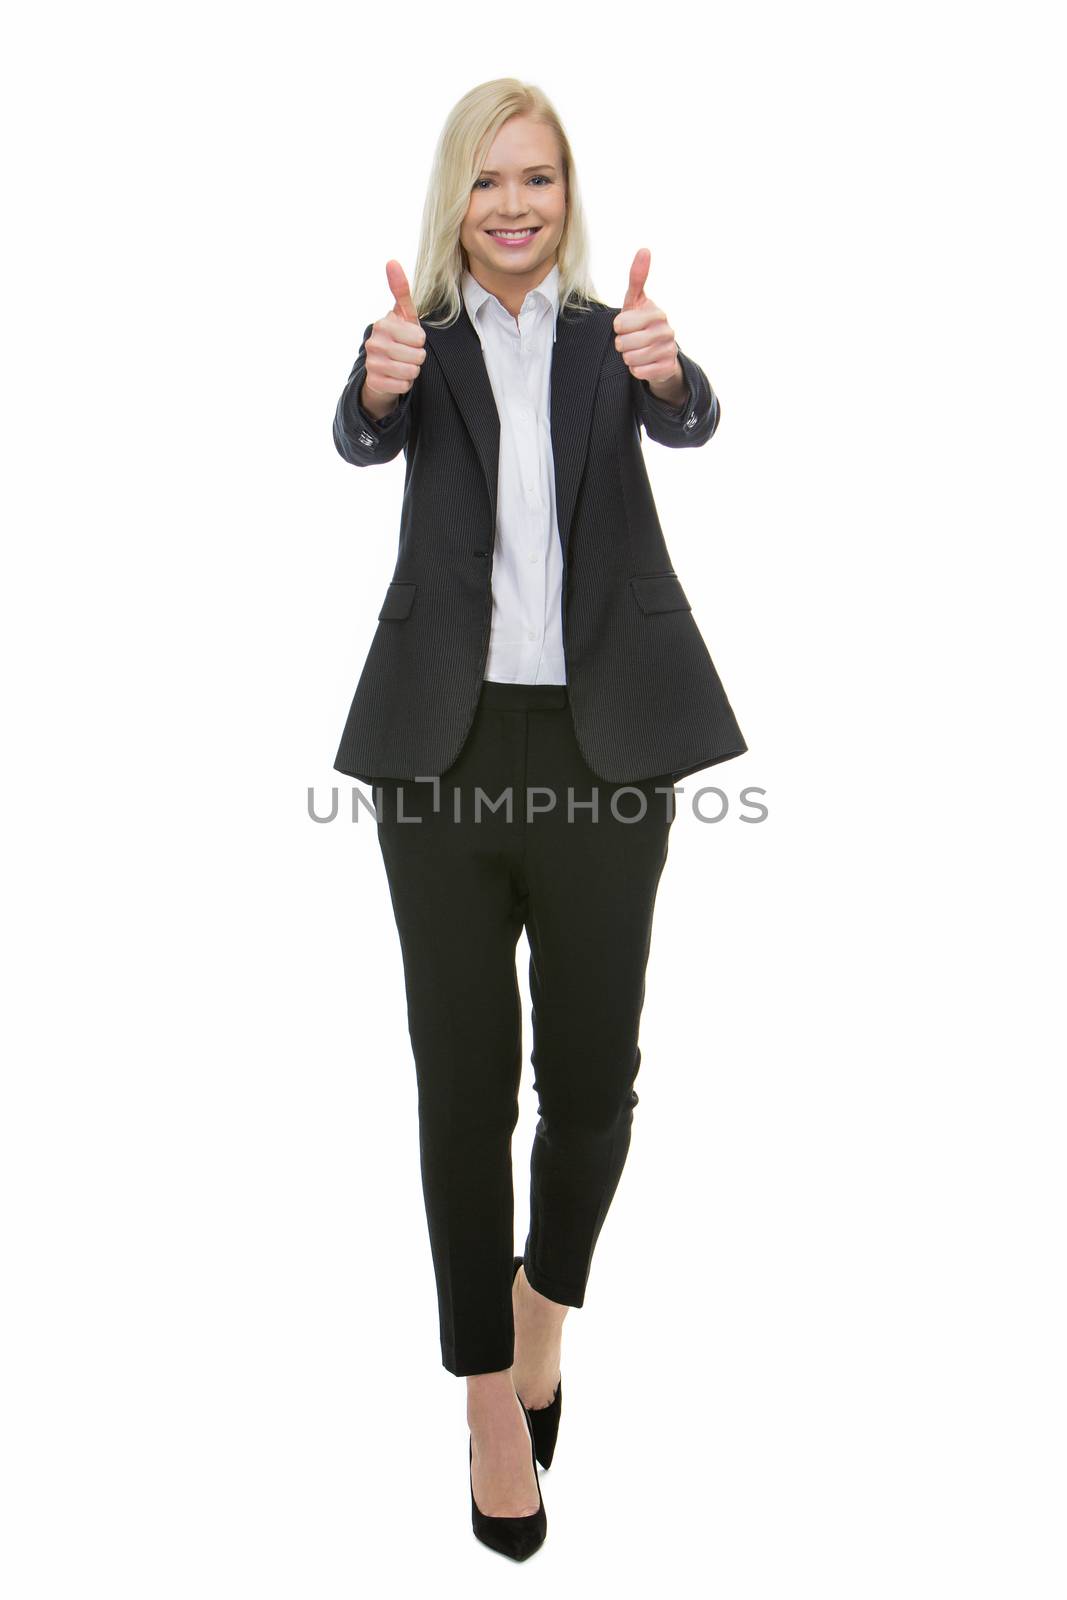 smiling blonde businesswoman thumbs up with both hands